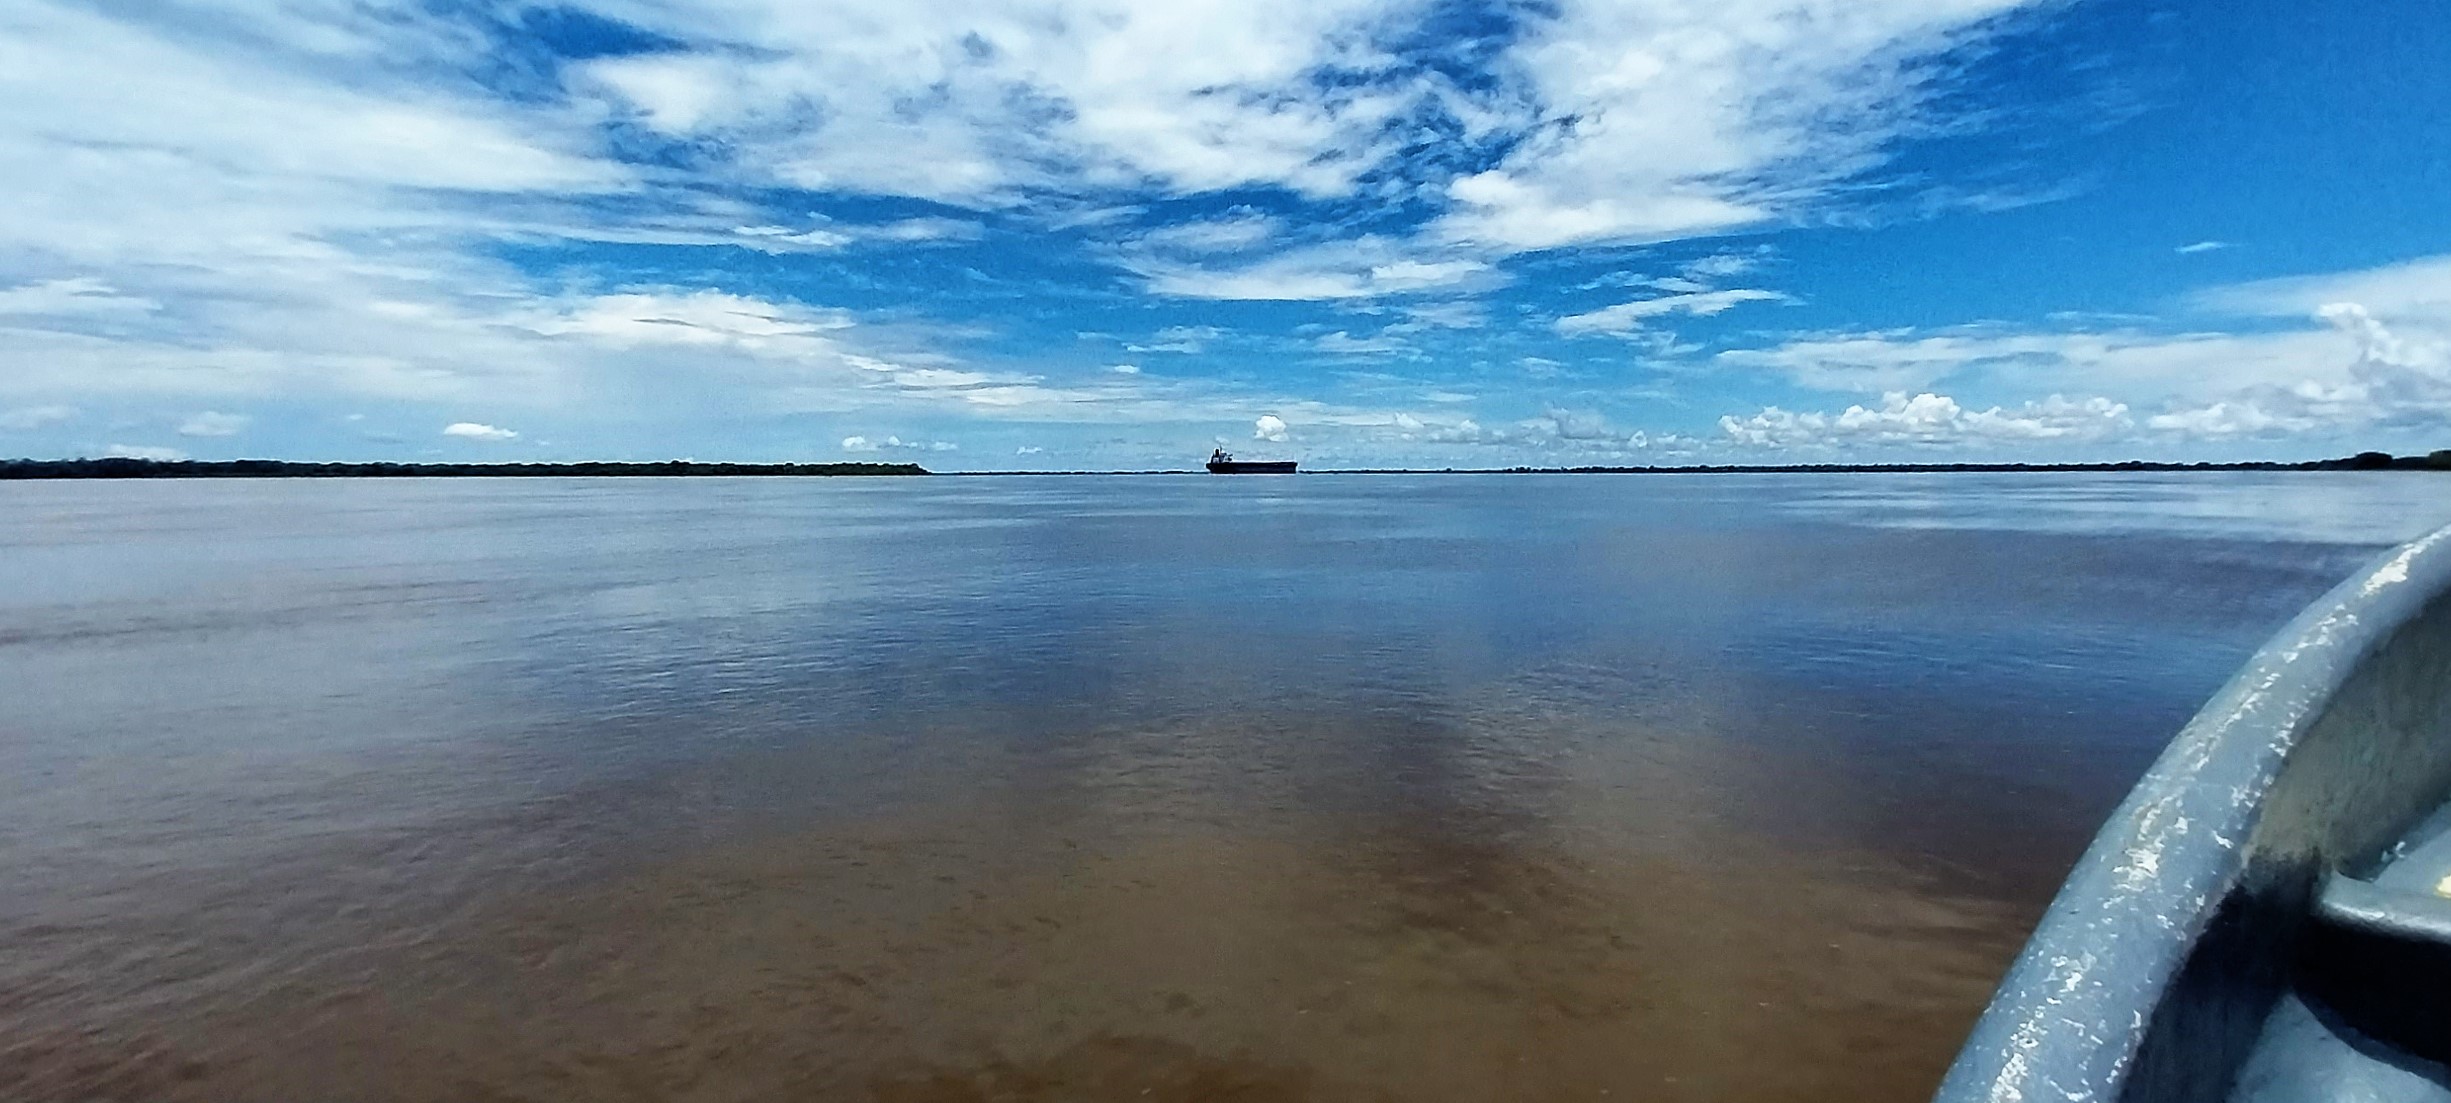 The main flow of the Rio Orinoco, the world's 4th largest river (and the longest in a single country). Large ships navigate the shifting channels to access iron ore mines upriver.